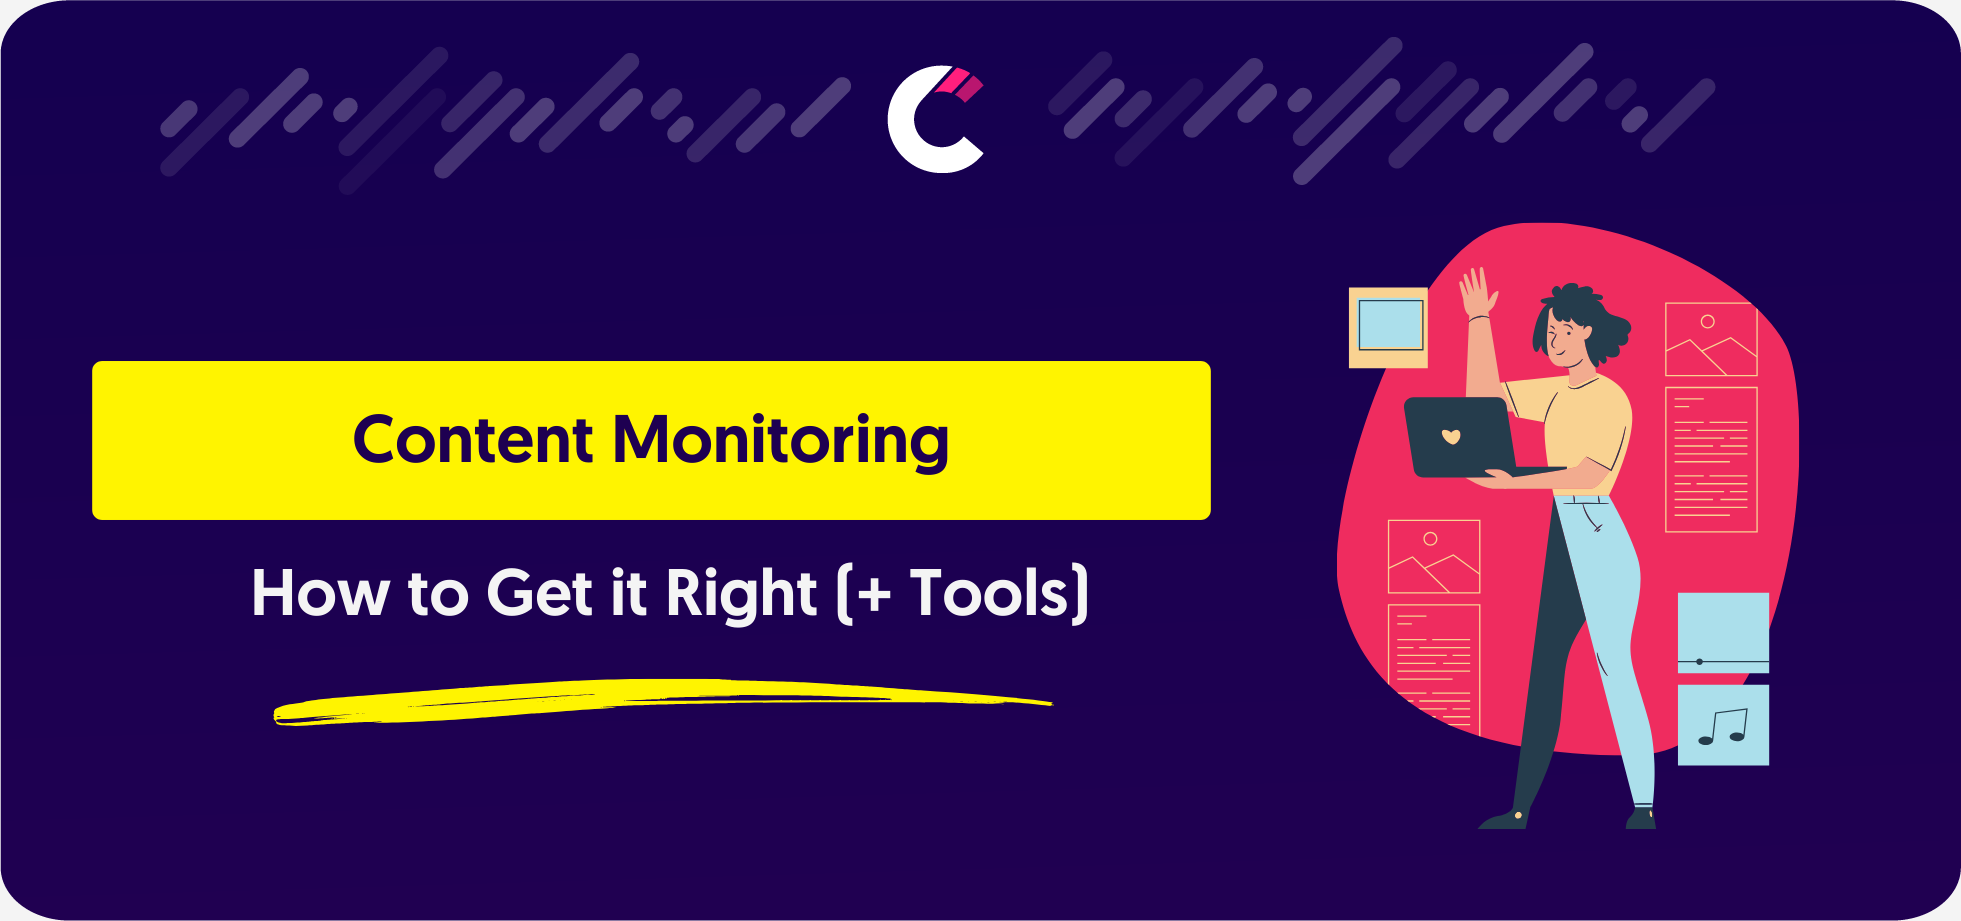 Content Monitoring How to Get it Right (+ Tools)